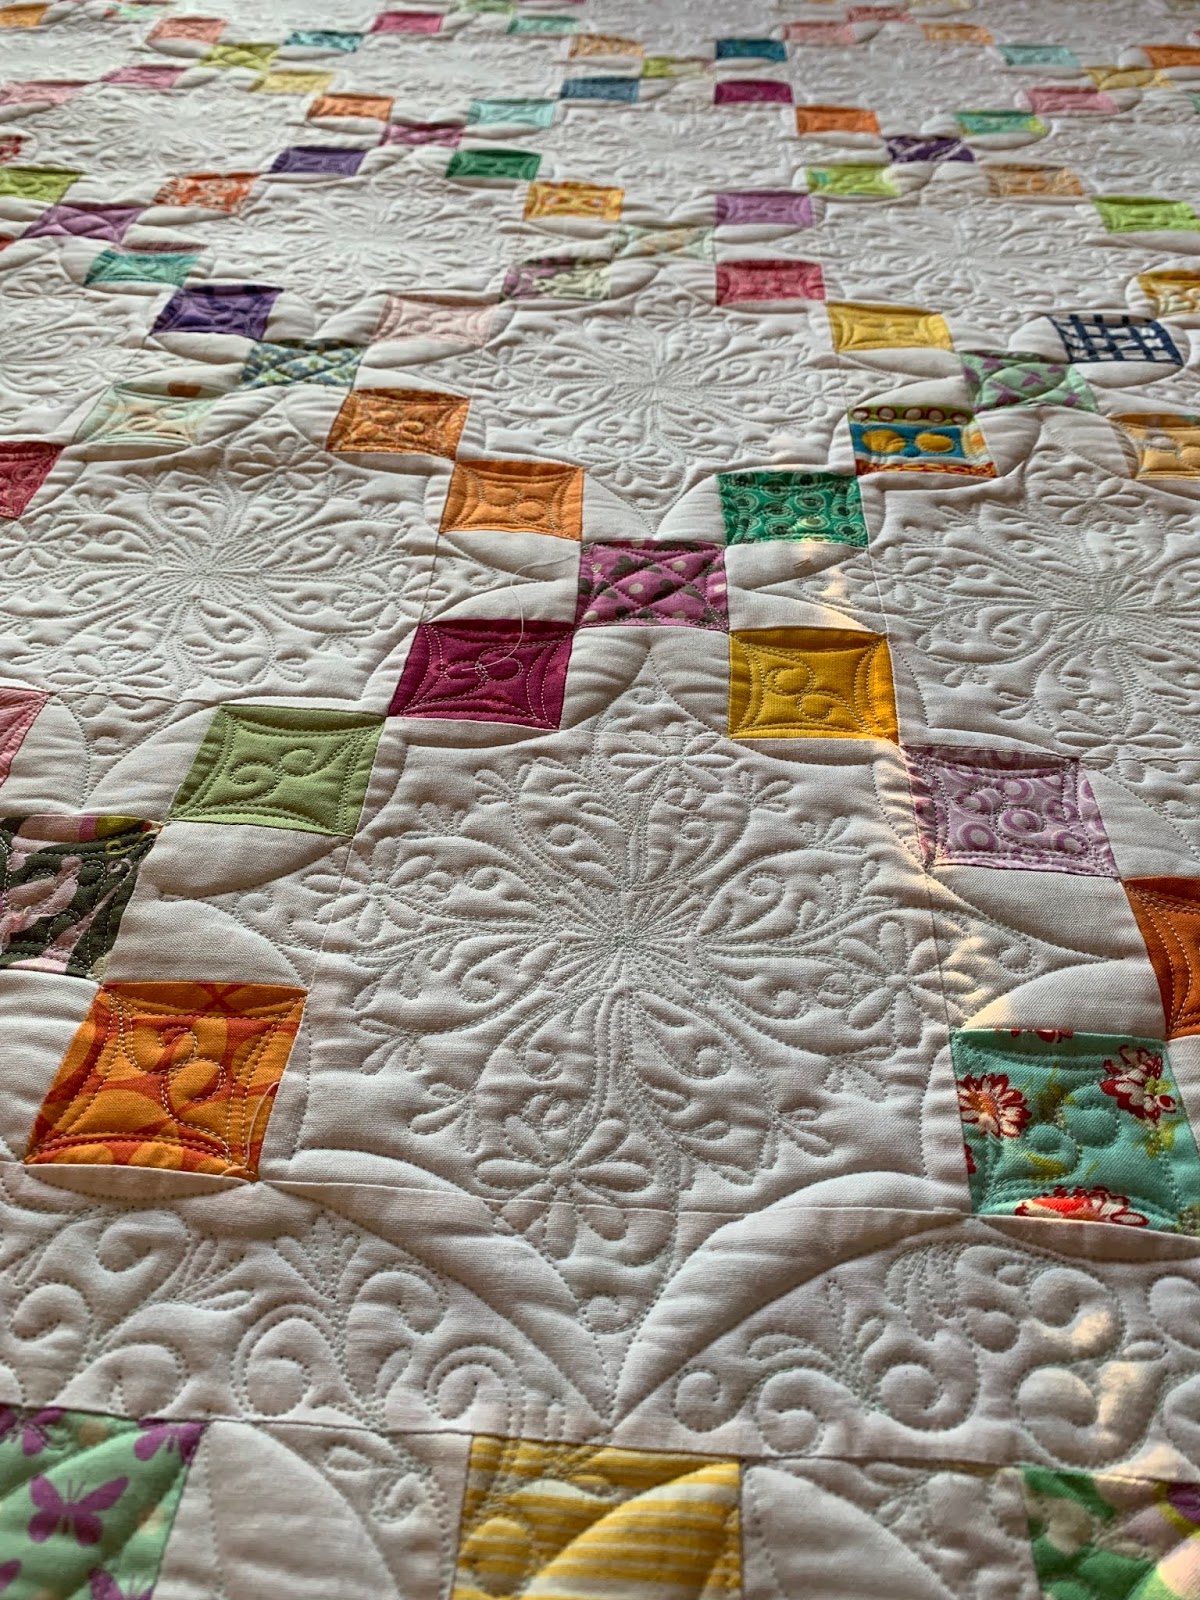 Sue Daurio's Quilting : H2H and Care Givers Quilt Drive 2019 - Update